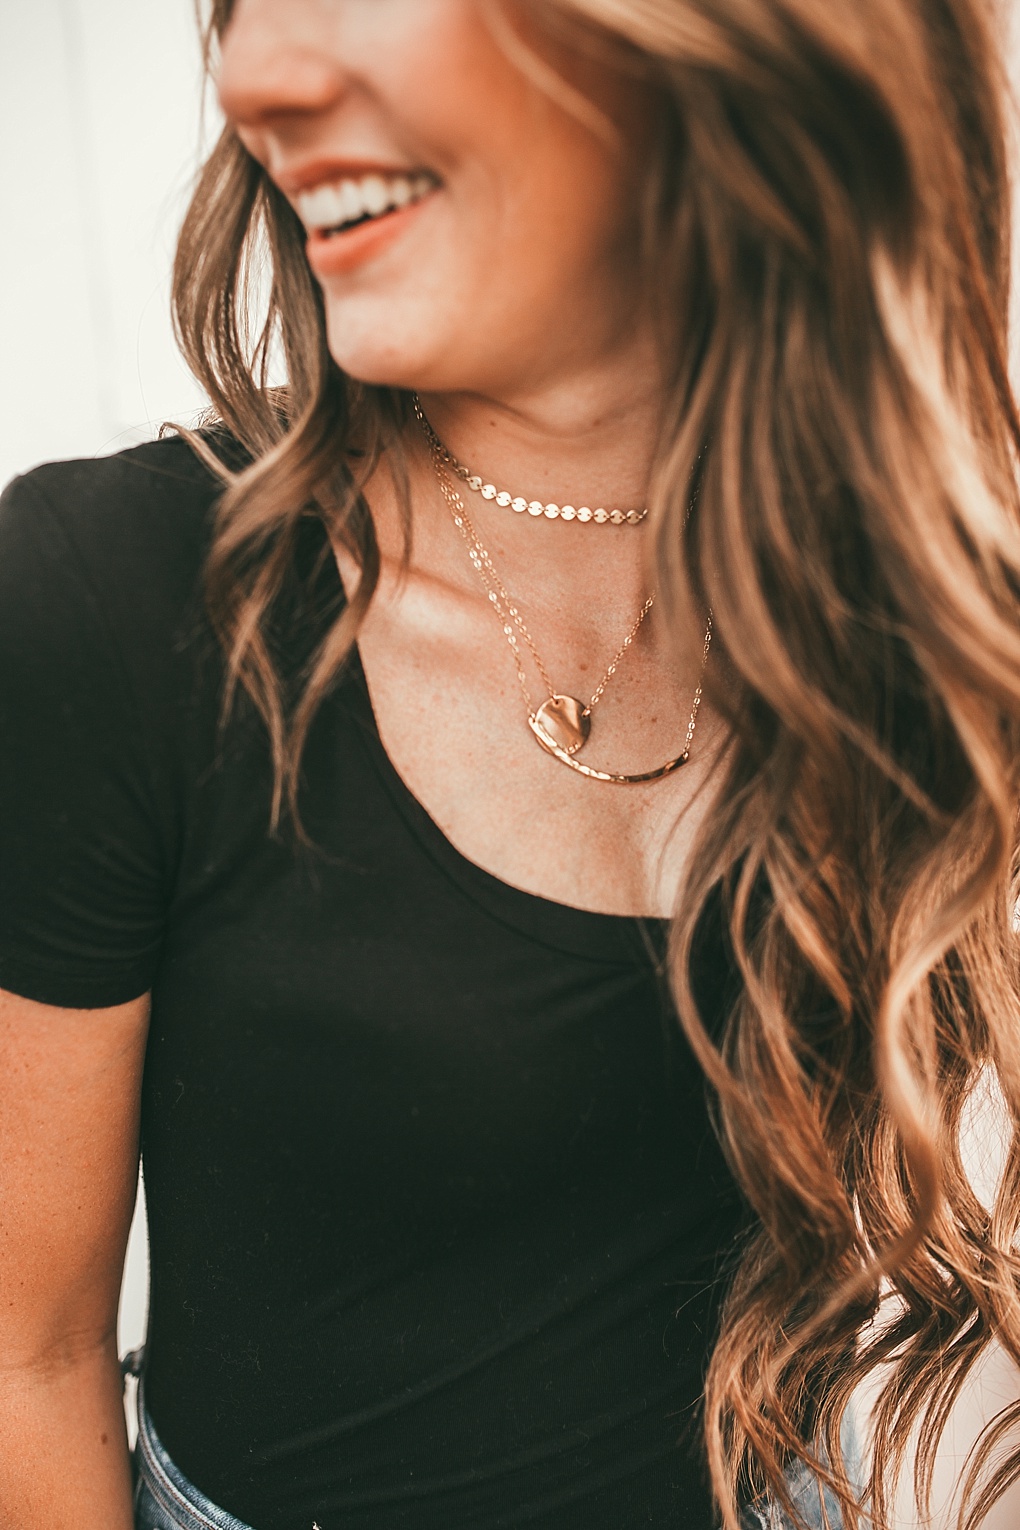 Have you ever wondered what the key to layering necklaces is? Utah Style Blogger Dani Marie is sharing her top tips to layering necklaces like a pro. 